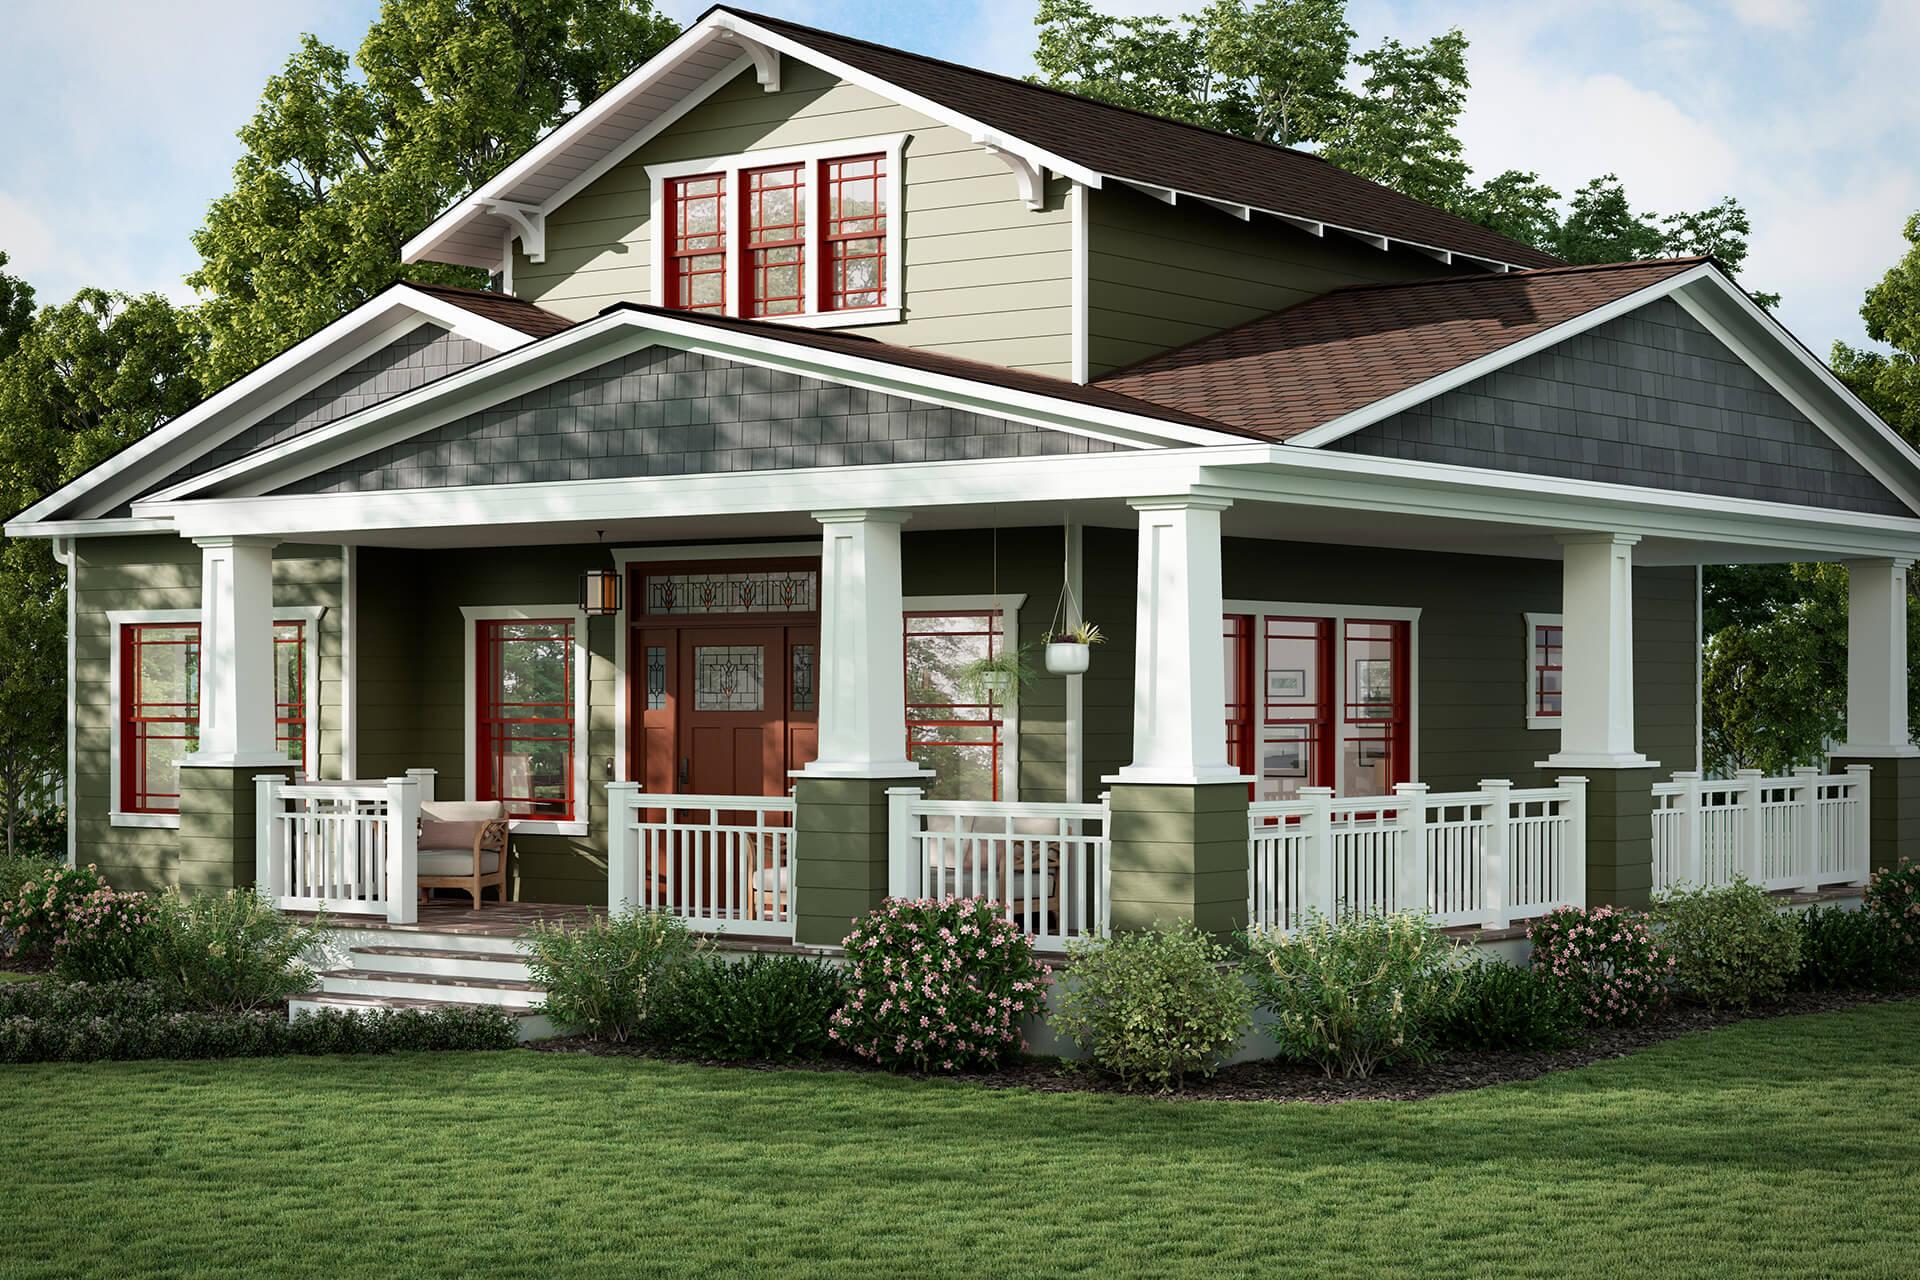 What is Craftsman-style house?